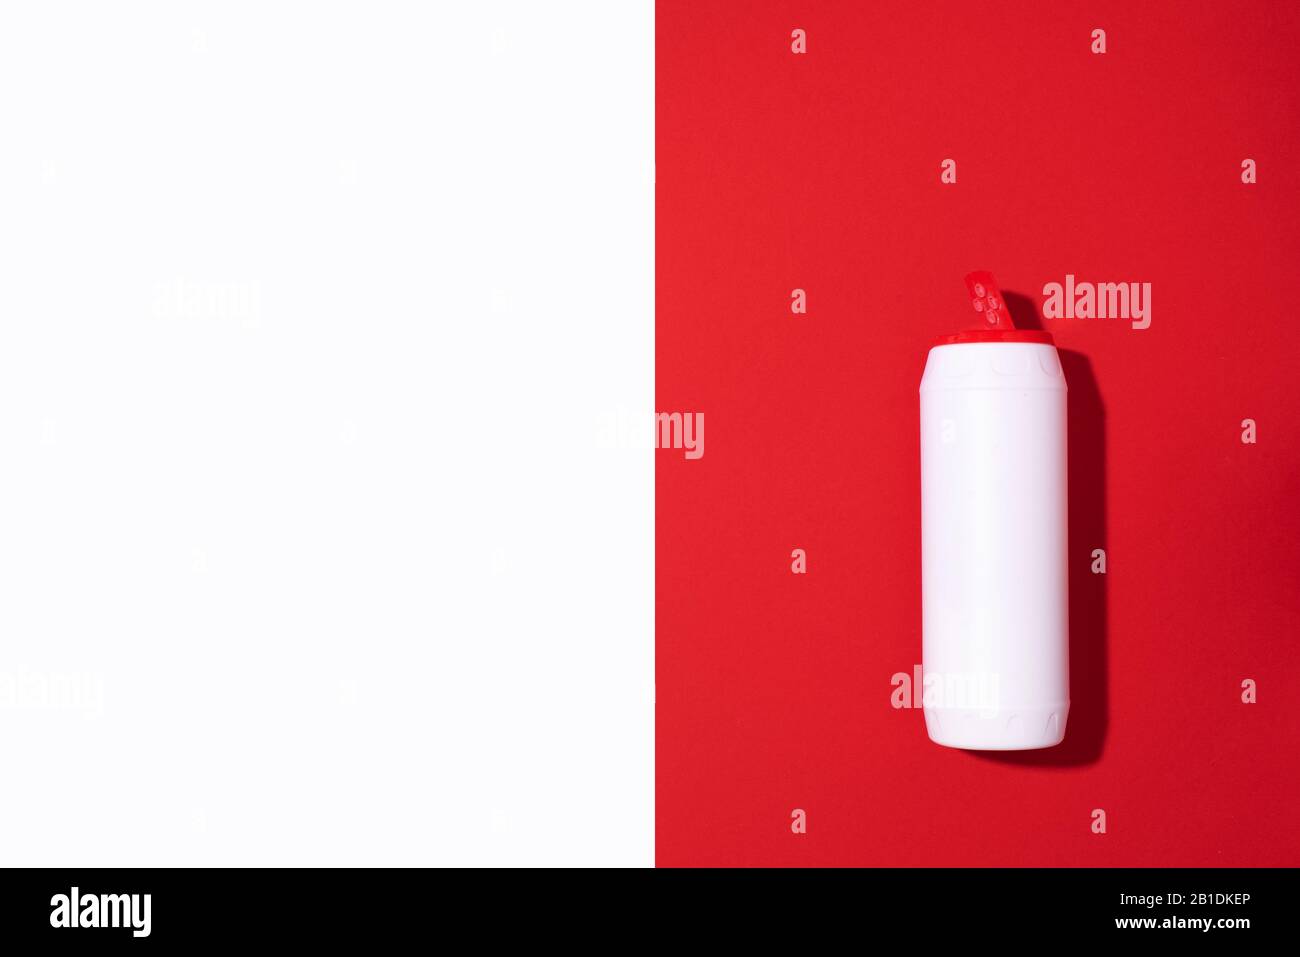 White plastic bottle of detergent powder or cleaning agent on red background. Copy space. Top view. Flat lay. Household chemicals concept. Stock Photo